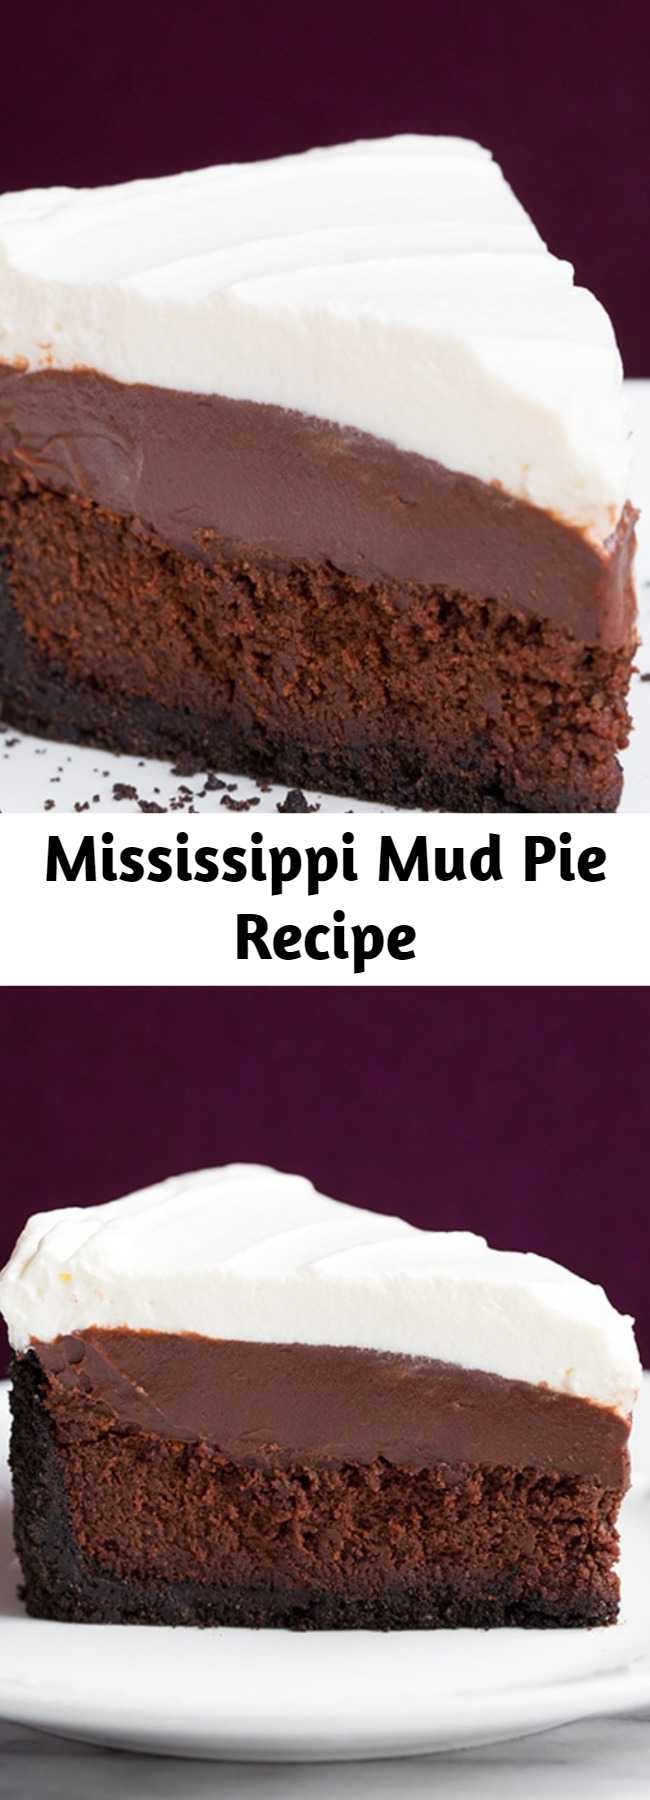 Mississipi Mud Pie – Four layers of utter decadence! You get a crisp Oreo crust, a rich fudgy cake layer, a creamy chocolate pudding and it's finished with a fluffy whipped cream.